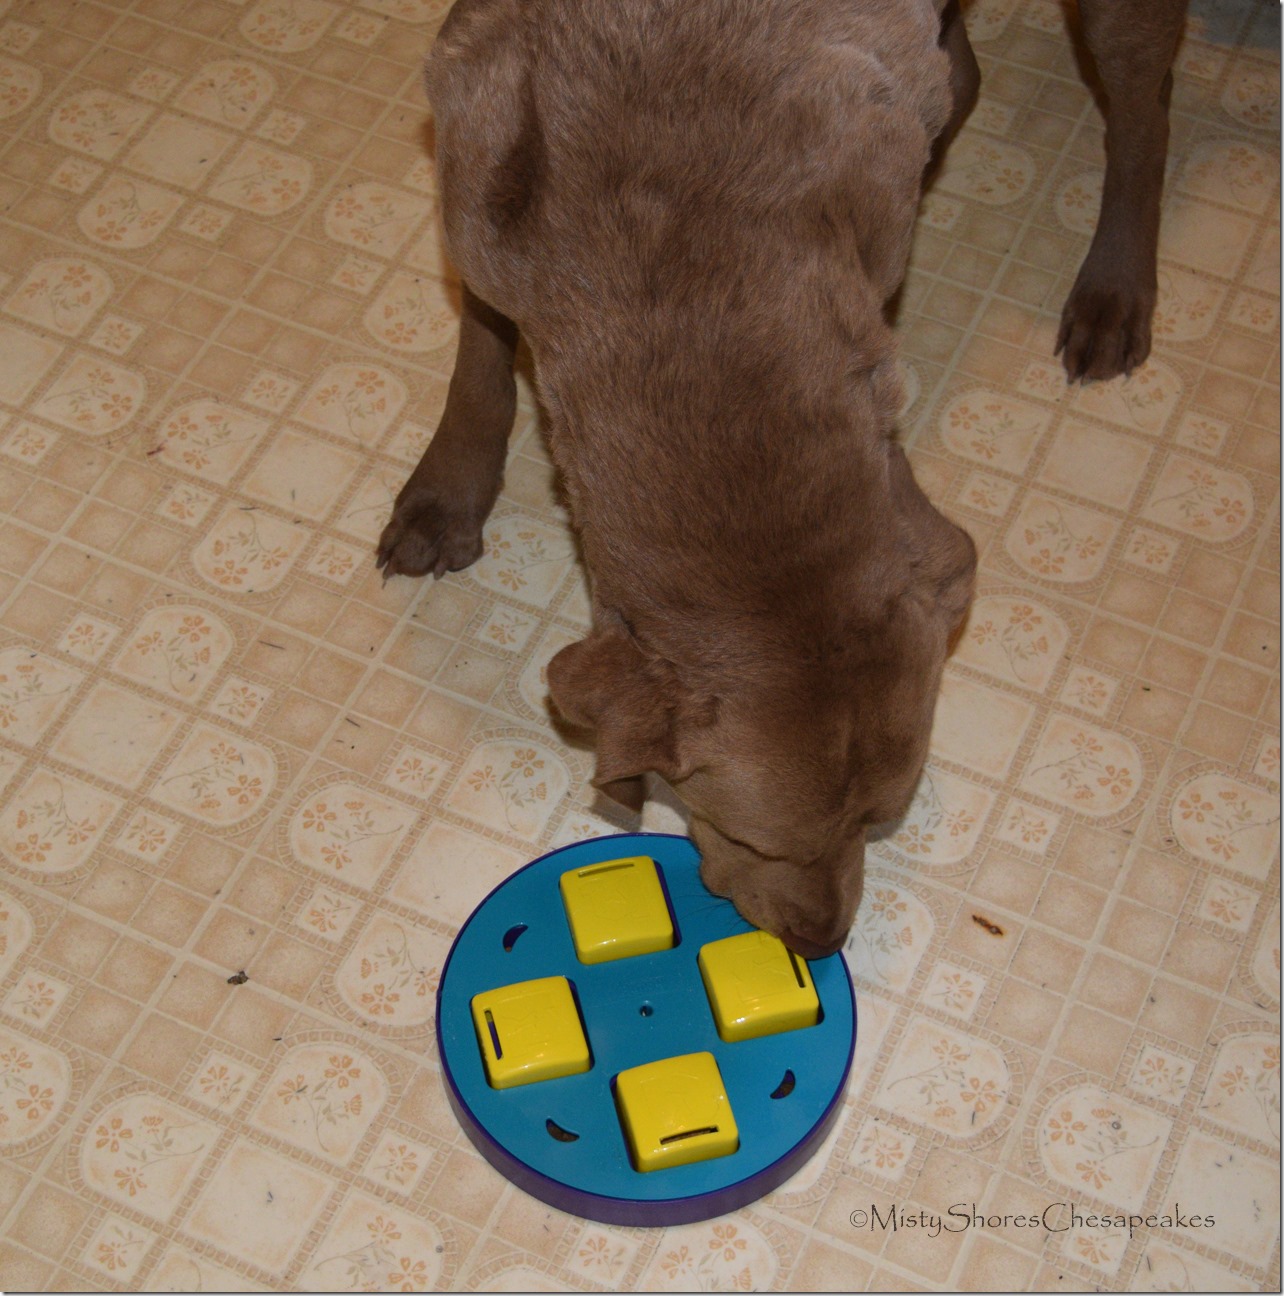 Misty Shores Chesapeakes Outward Hound Puzzle Dog Toy Review (7)